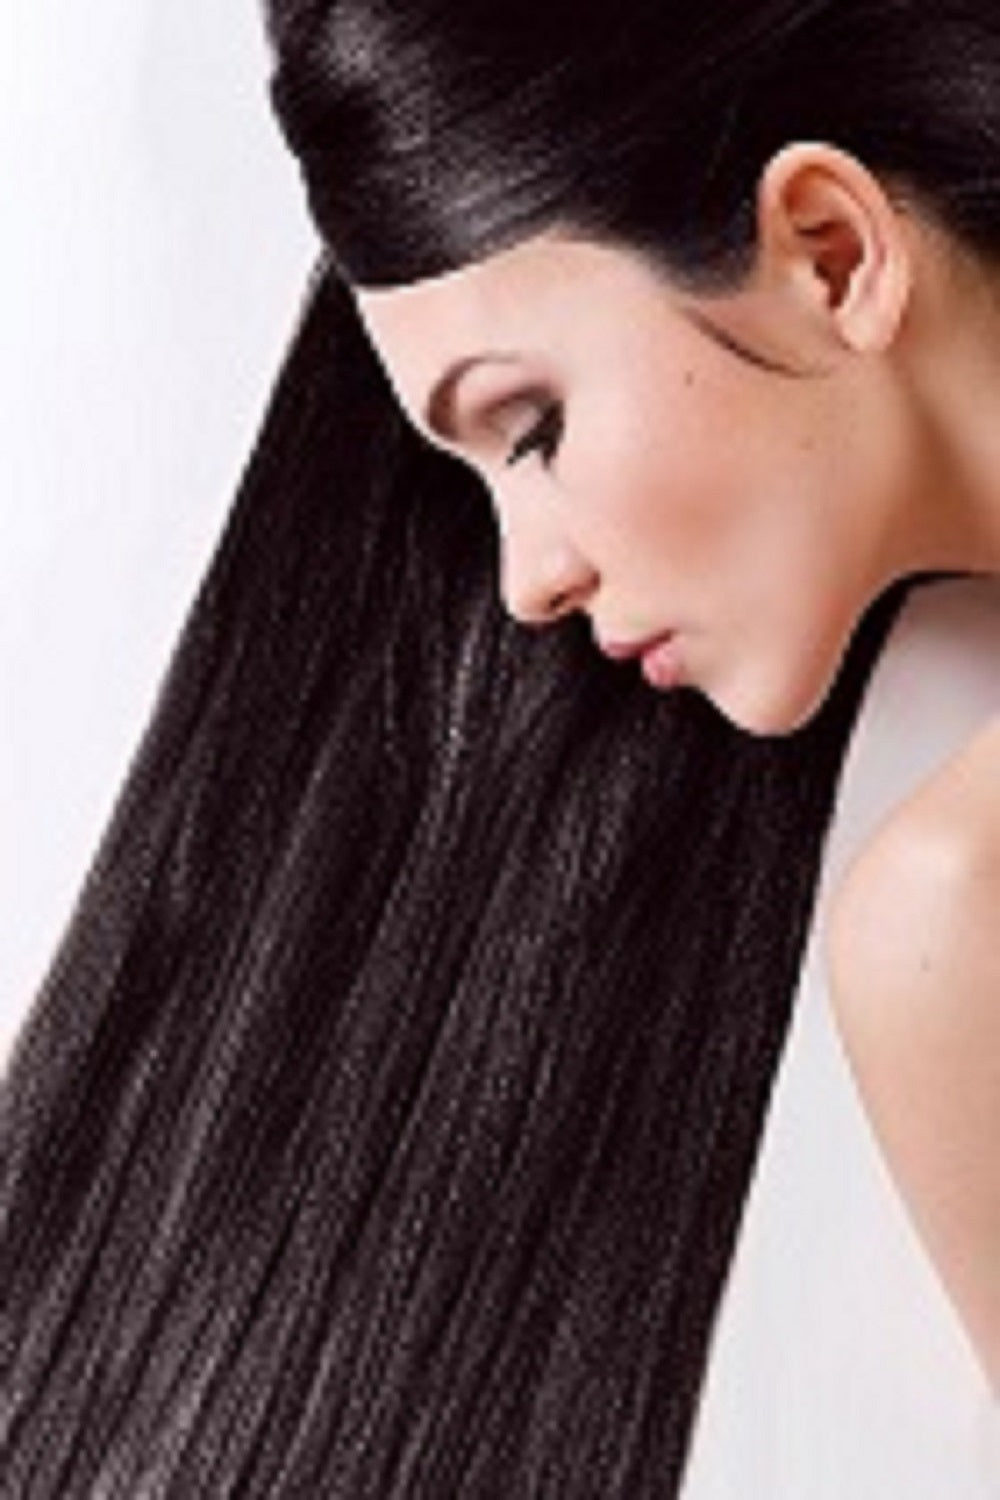 Sanotint Black Brown hair dye without ammonia. When you choose sanotint hair products, one can be assured thisproduct will protect and keep your hair healthy